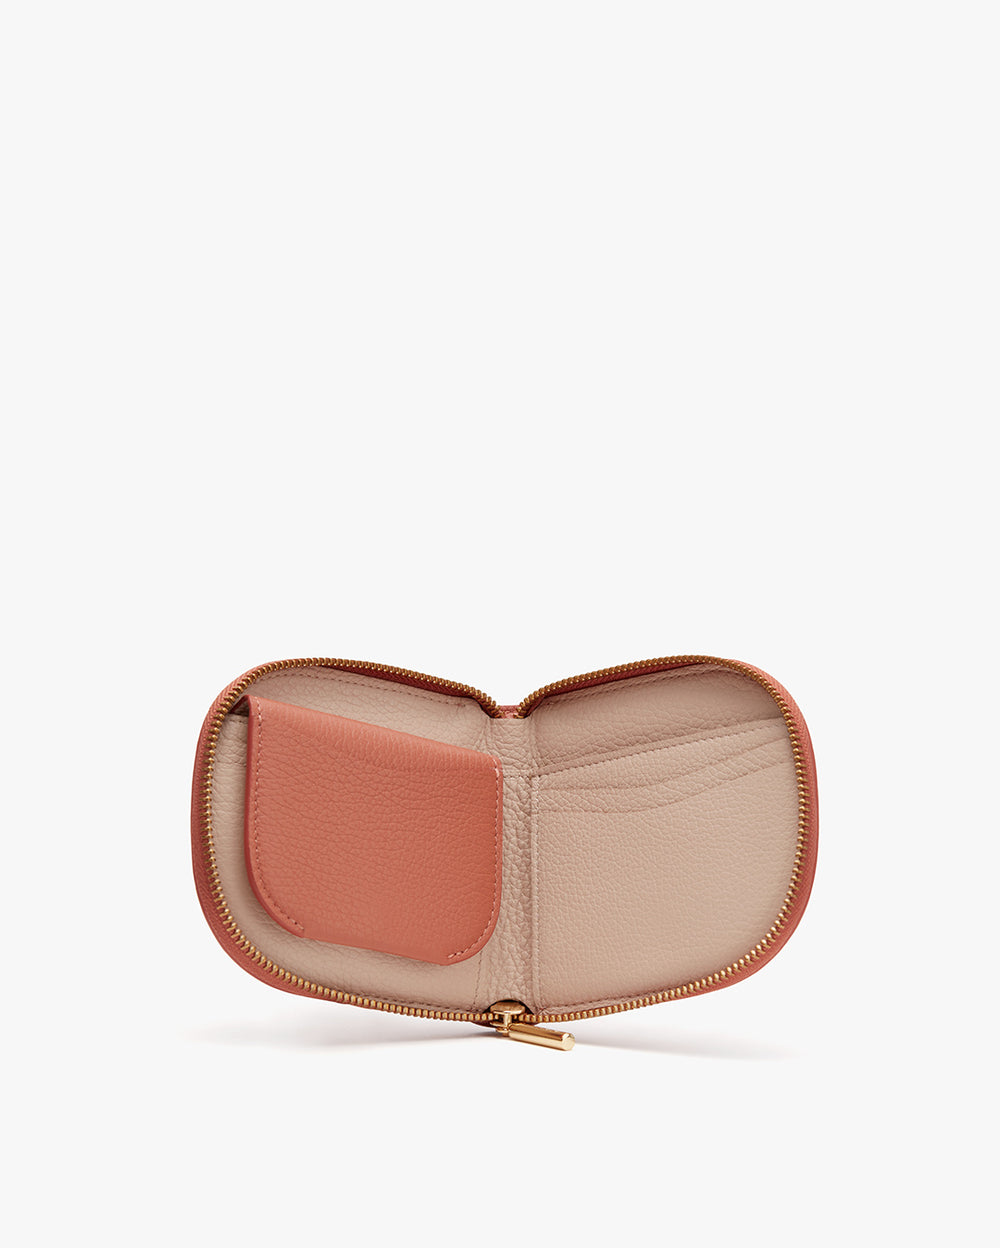 Open heart-shaped wallet with two internal compartments.